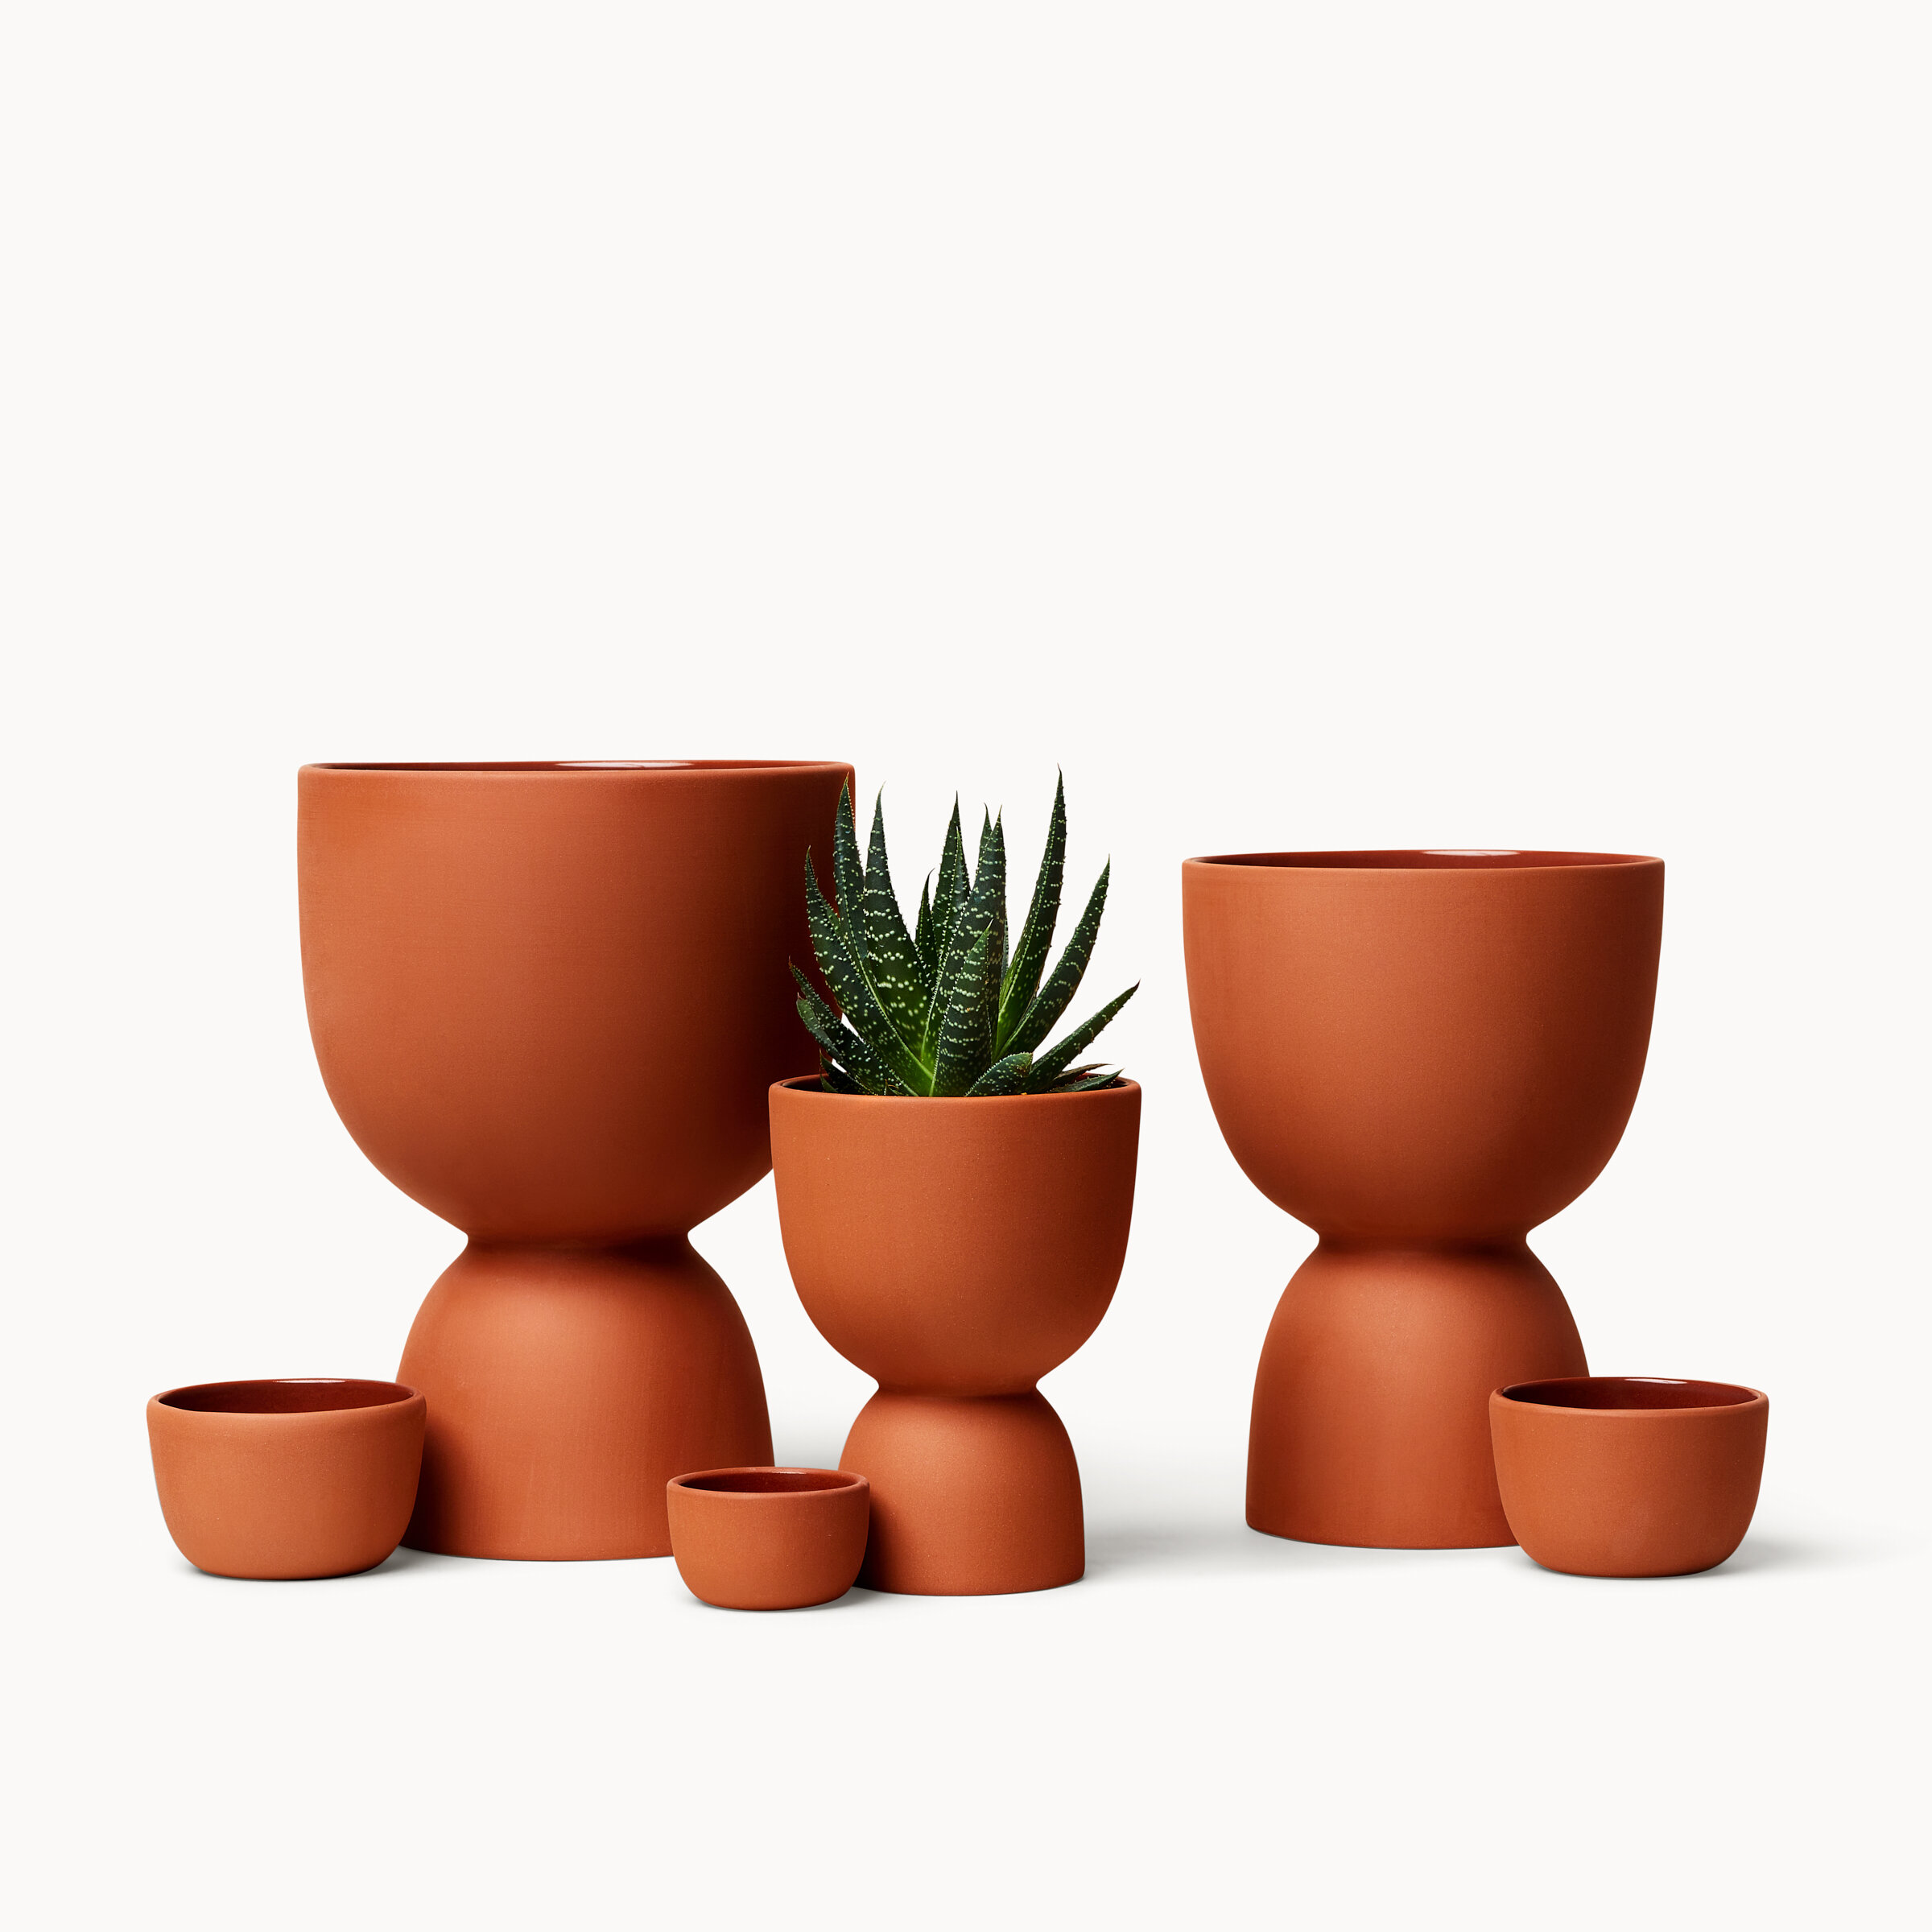 Image of Terracotta planters